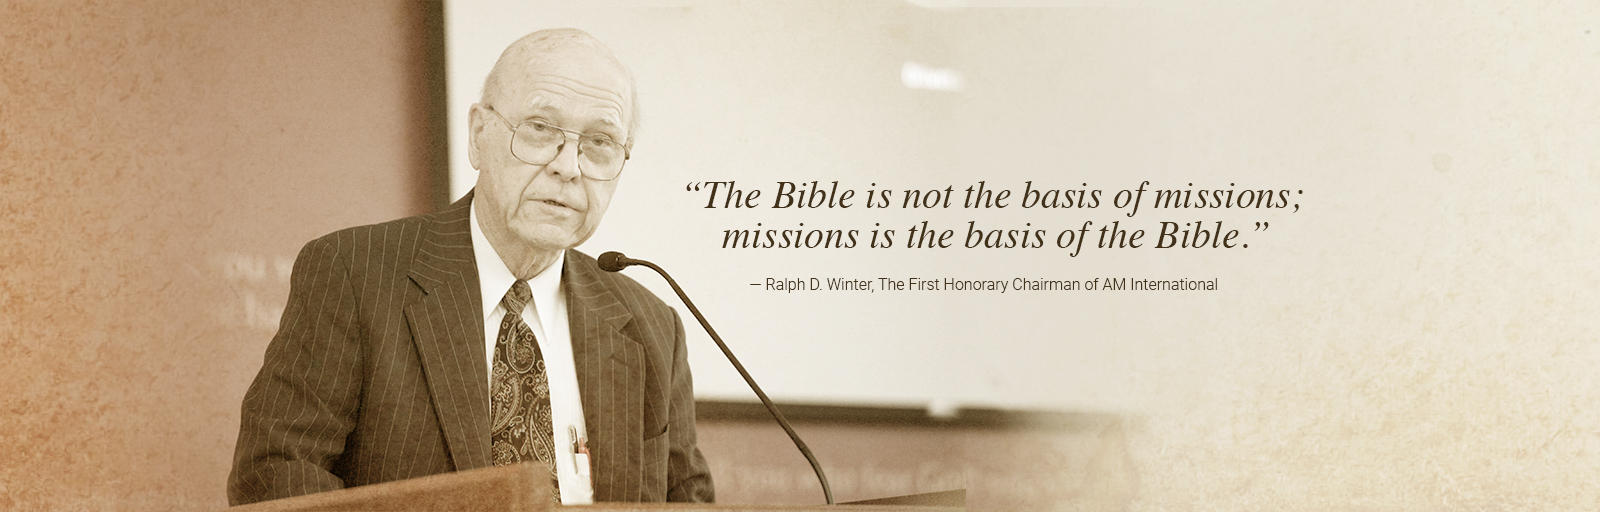 The Bible is not the basis of missions; missions is the basis of the Bible.